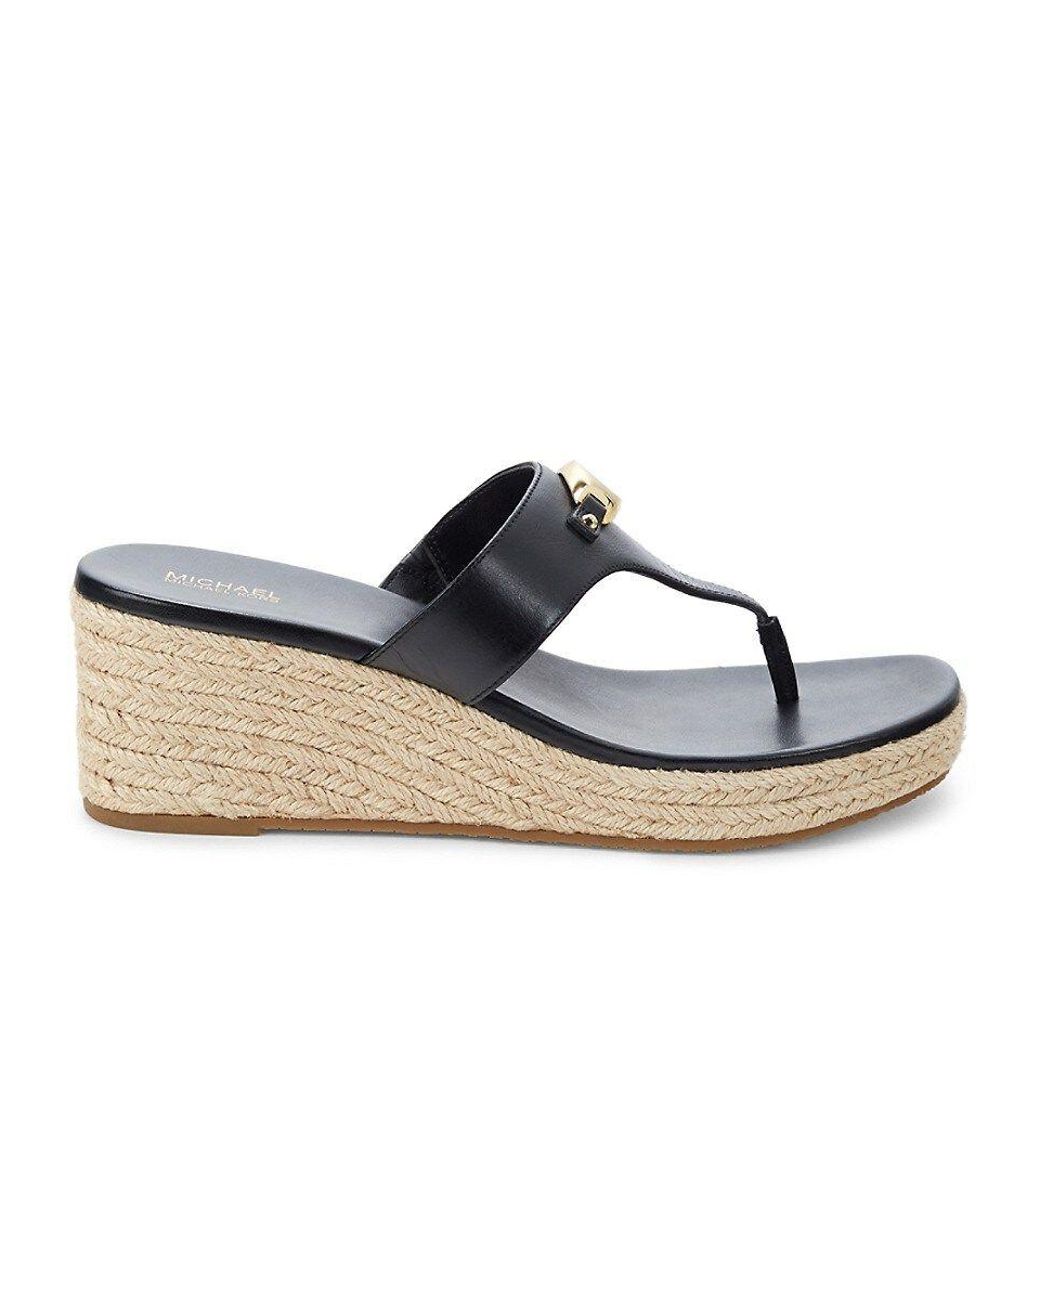 Michael Kors Tilly Leather Espadrille Thong Wedge Sandals in Blue | Lyst